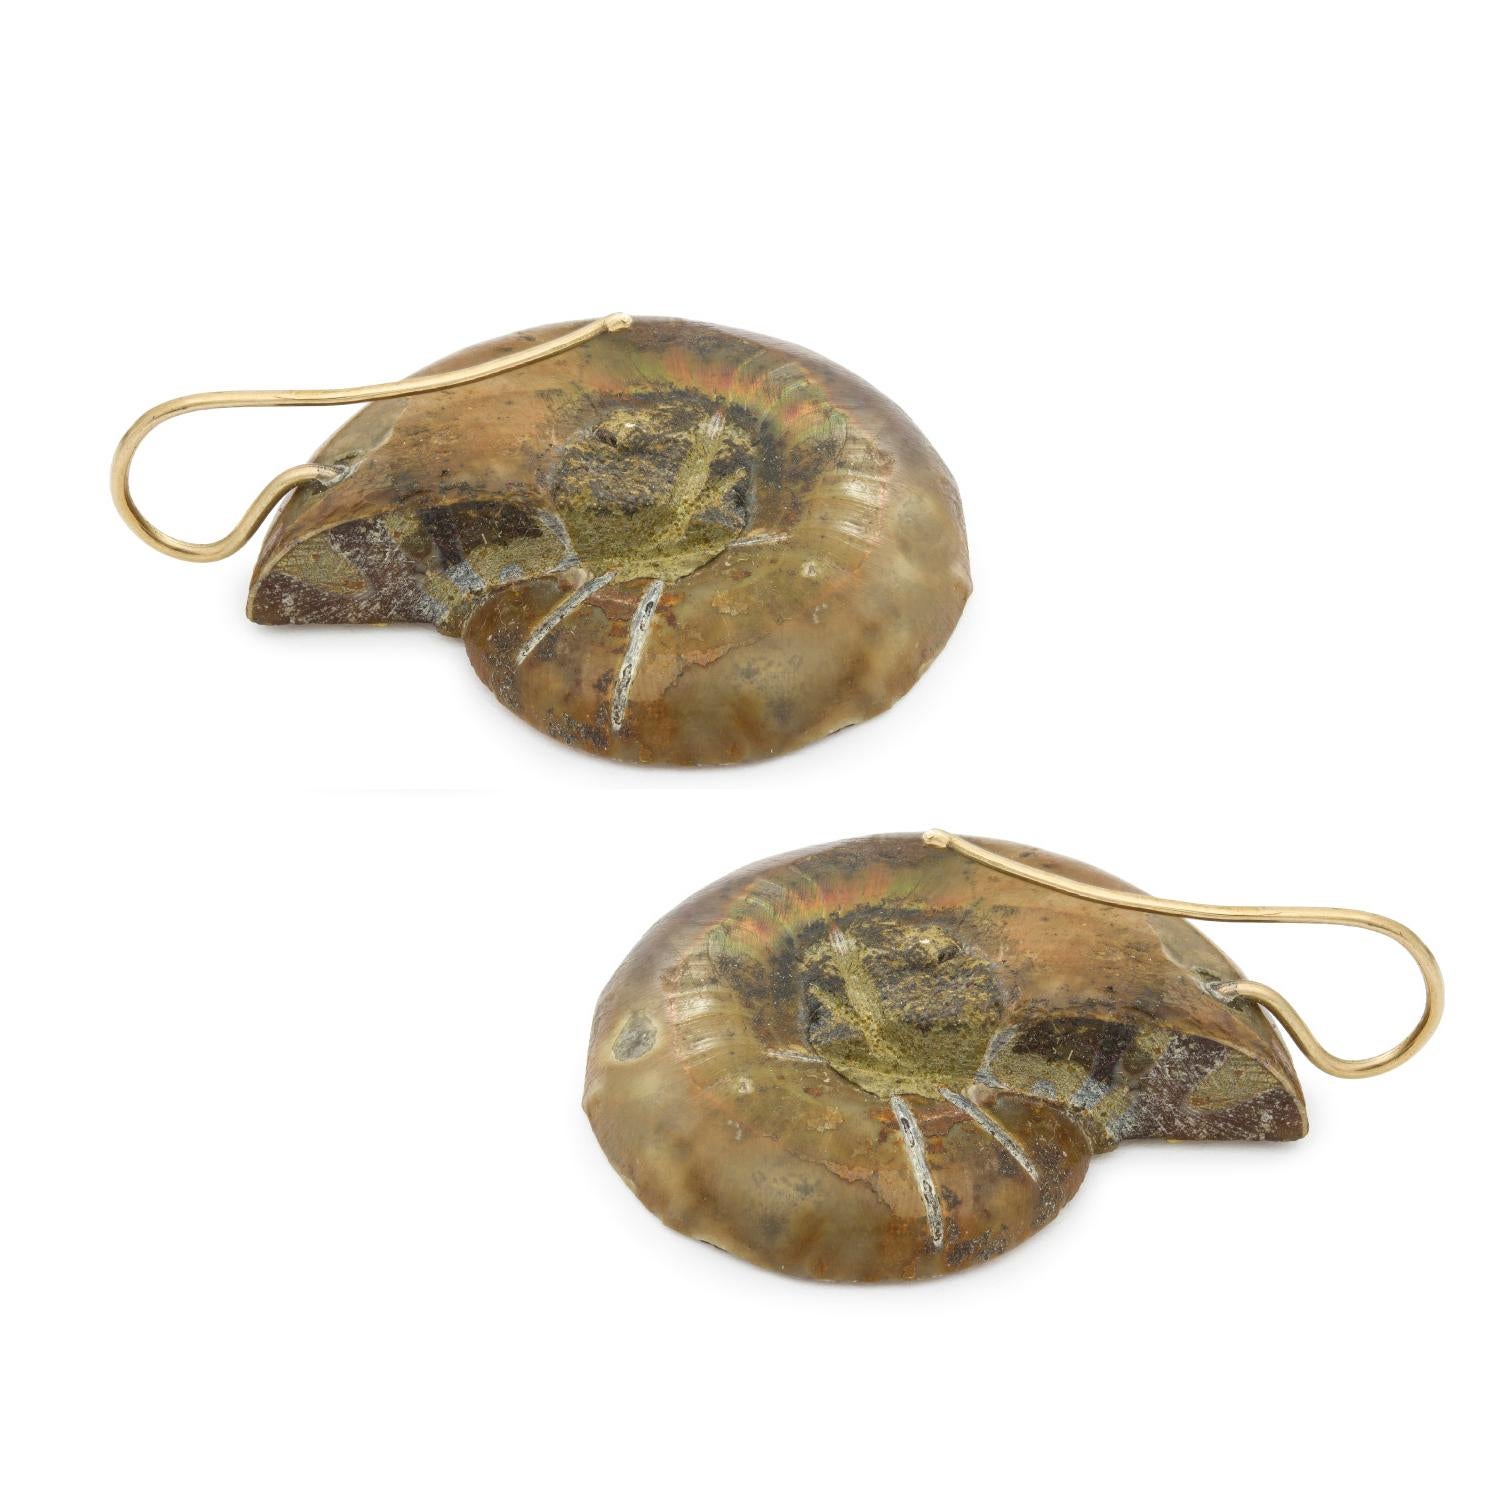 A pair of ammonite earrings, the brown polished spiral chambers forming a shell shape, the top set with a yellow metal flower with an old-cut diamond centre, to hook fittings, circa 1920, measuring 3cm x 2.5cm, gross weight 16.5grams.

A Pair Of